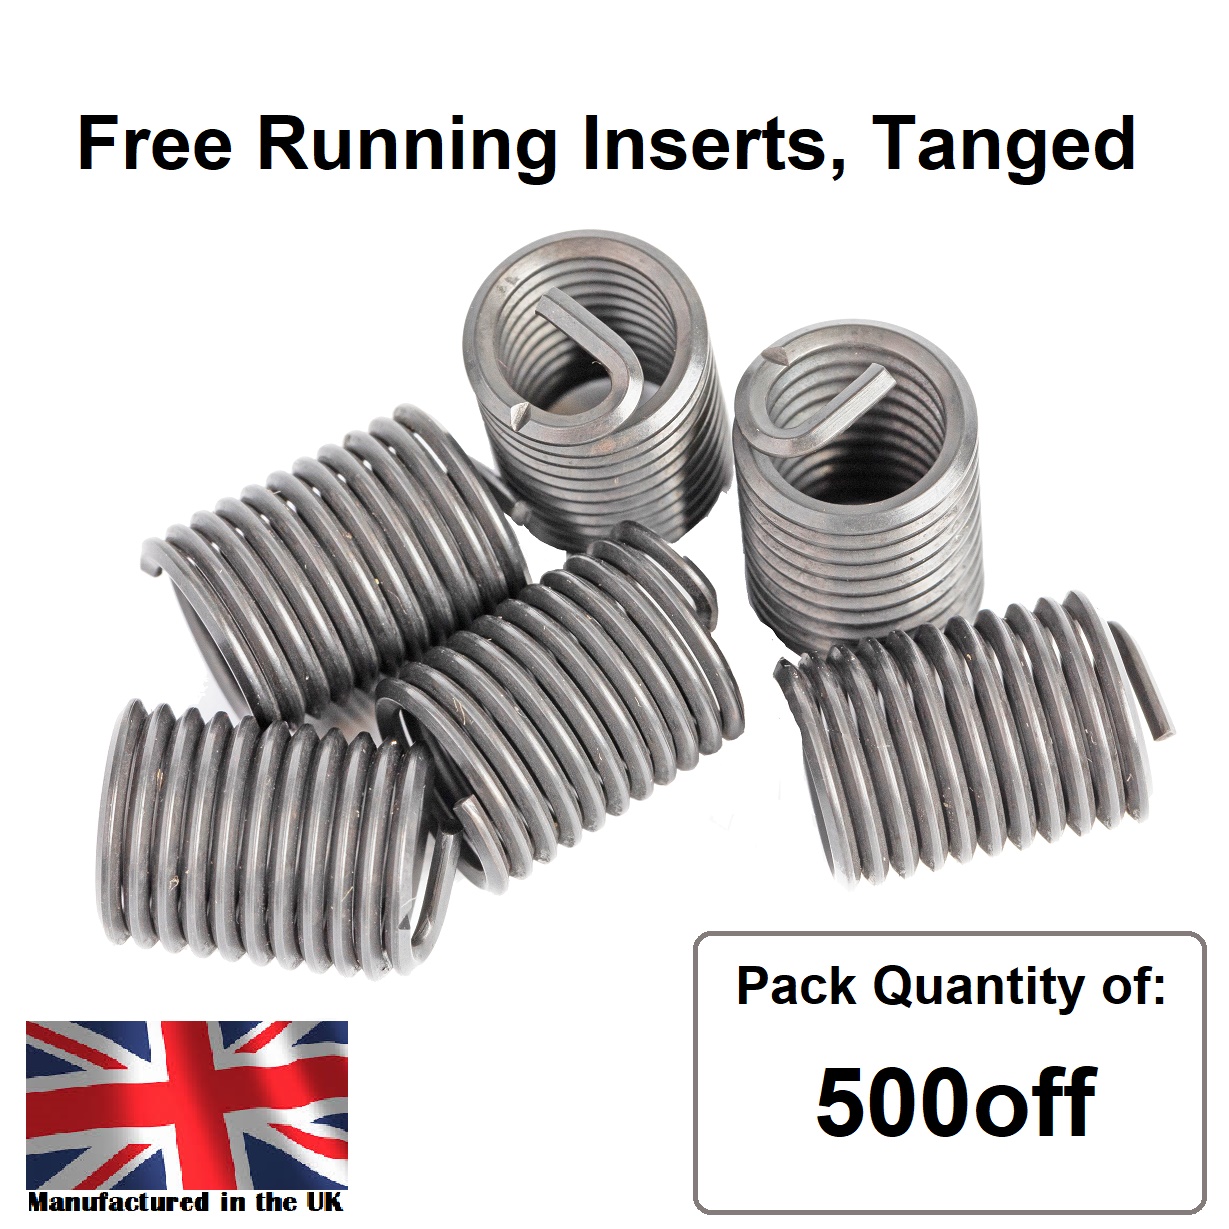 M3 x 0.5 x 1D Metric Coarse, Free Running, Tanged, Wire Thread Repair Insert, 304/A2 Stainless (Pack 500)